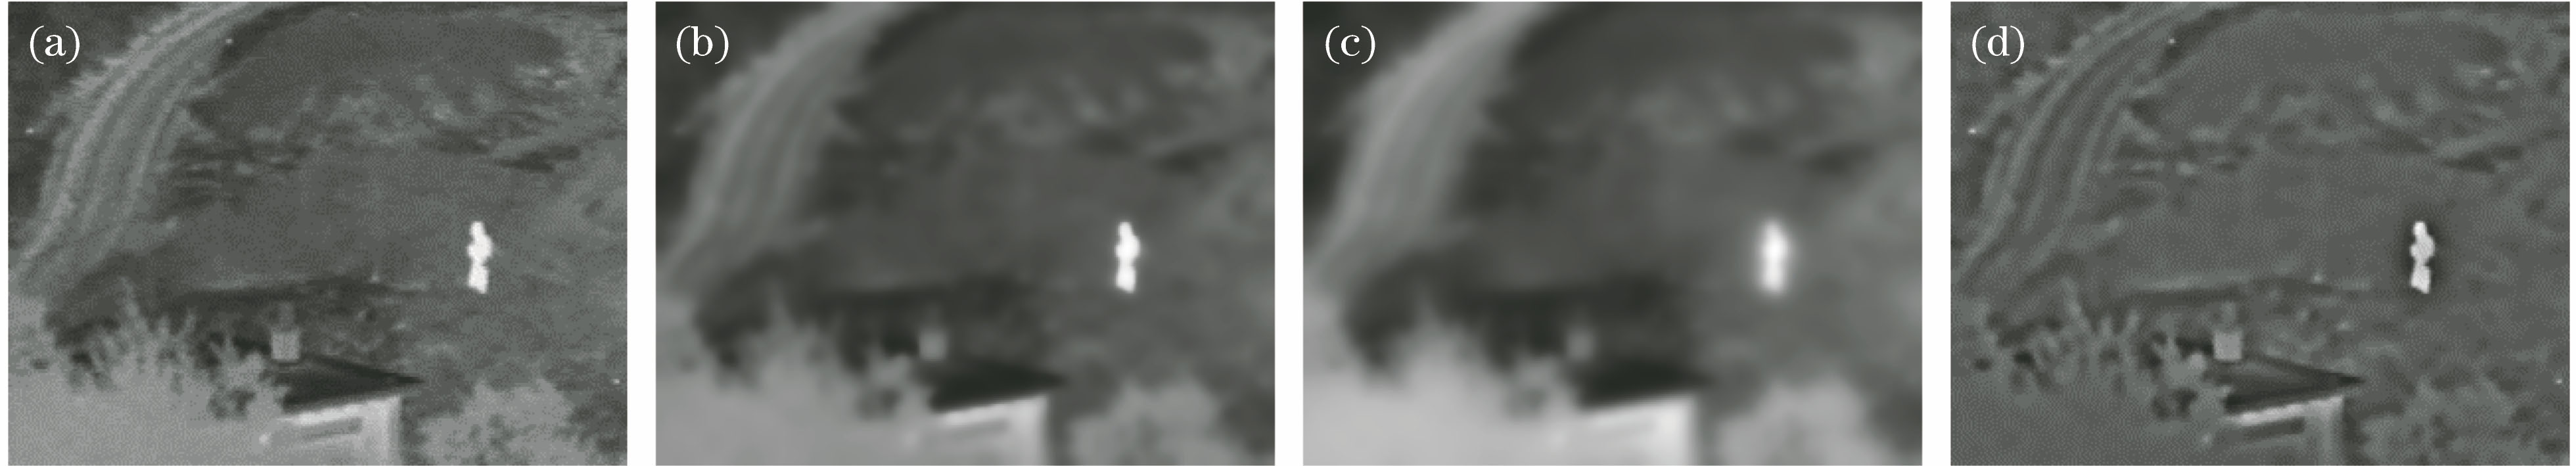 Decomposed results of low-frequency subband of UNcamp infrared source image via Gaussian filter. (a) Infrared source image; (b) low-frequency subband after filtering; (c) low-frequency approximate component; (d) strong edge component